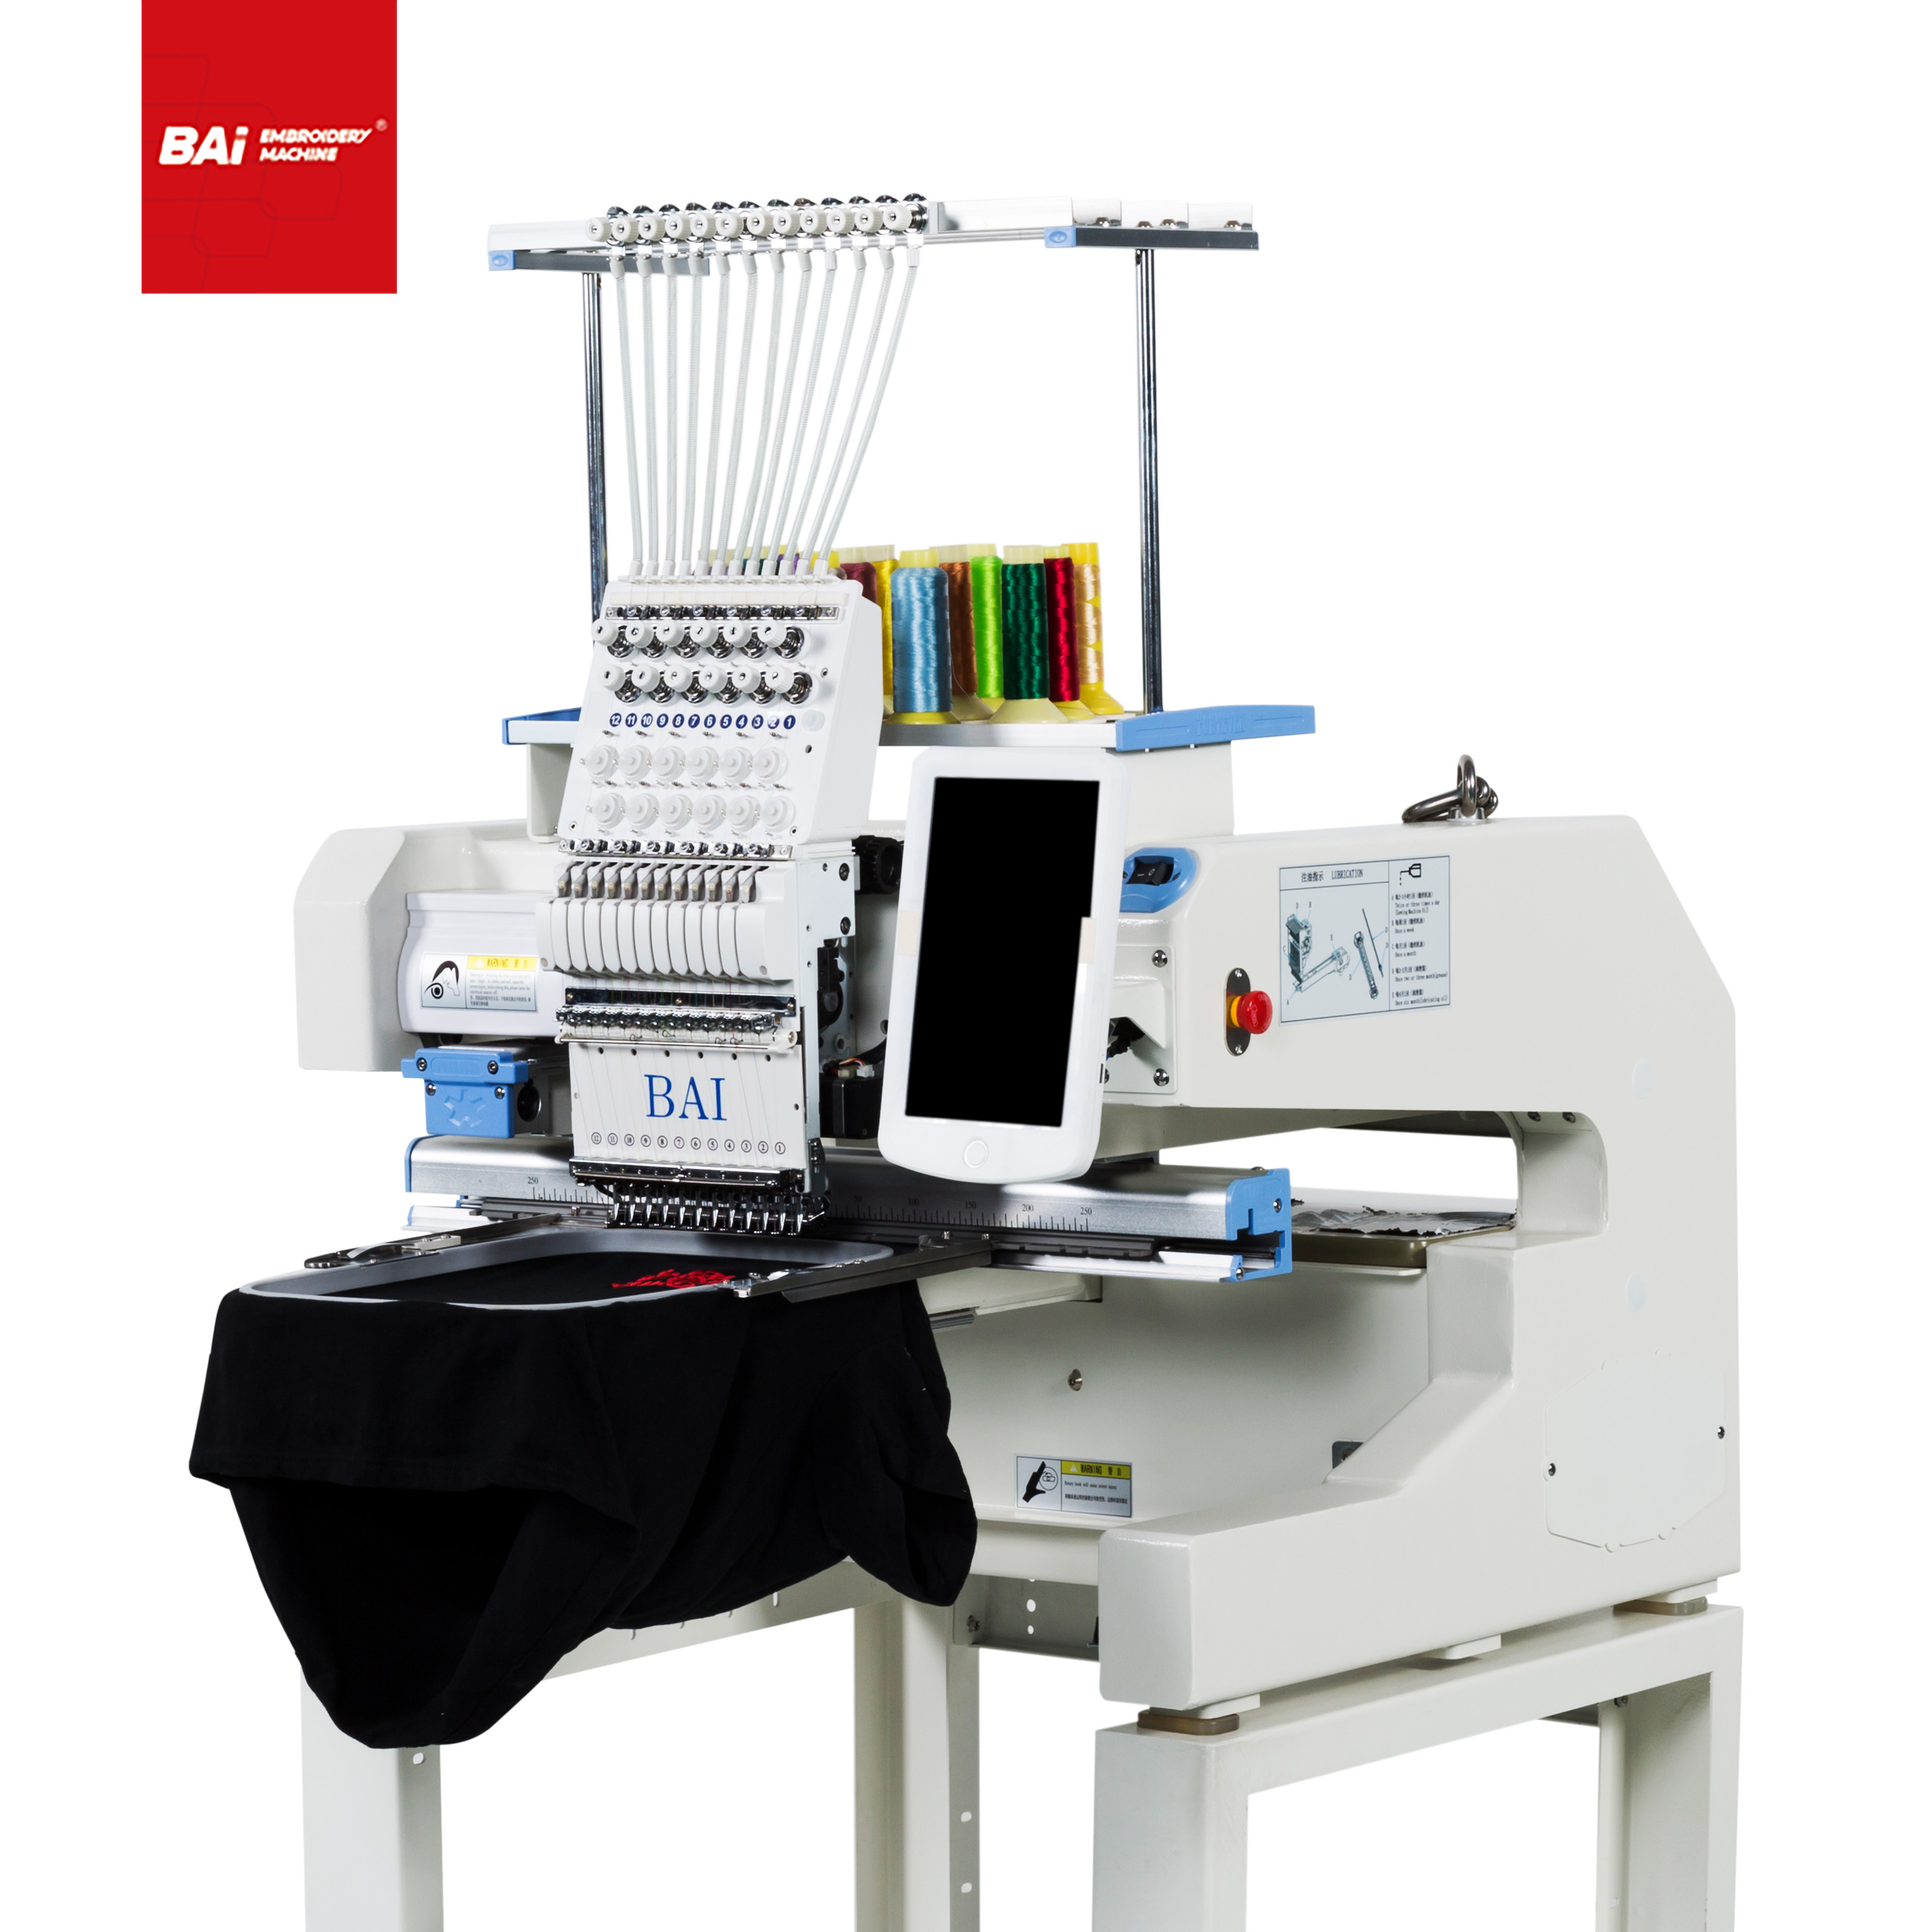 BAI High Effciency Dahao Computer 400*500mm Embroidery Machine for Price